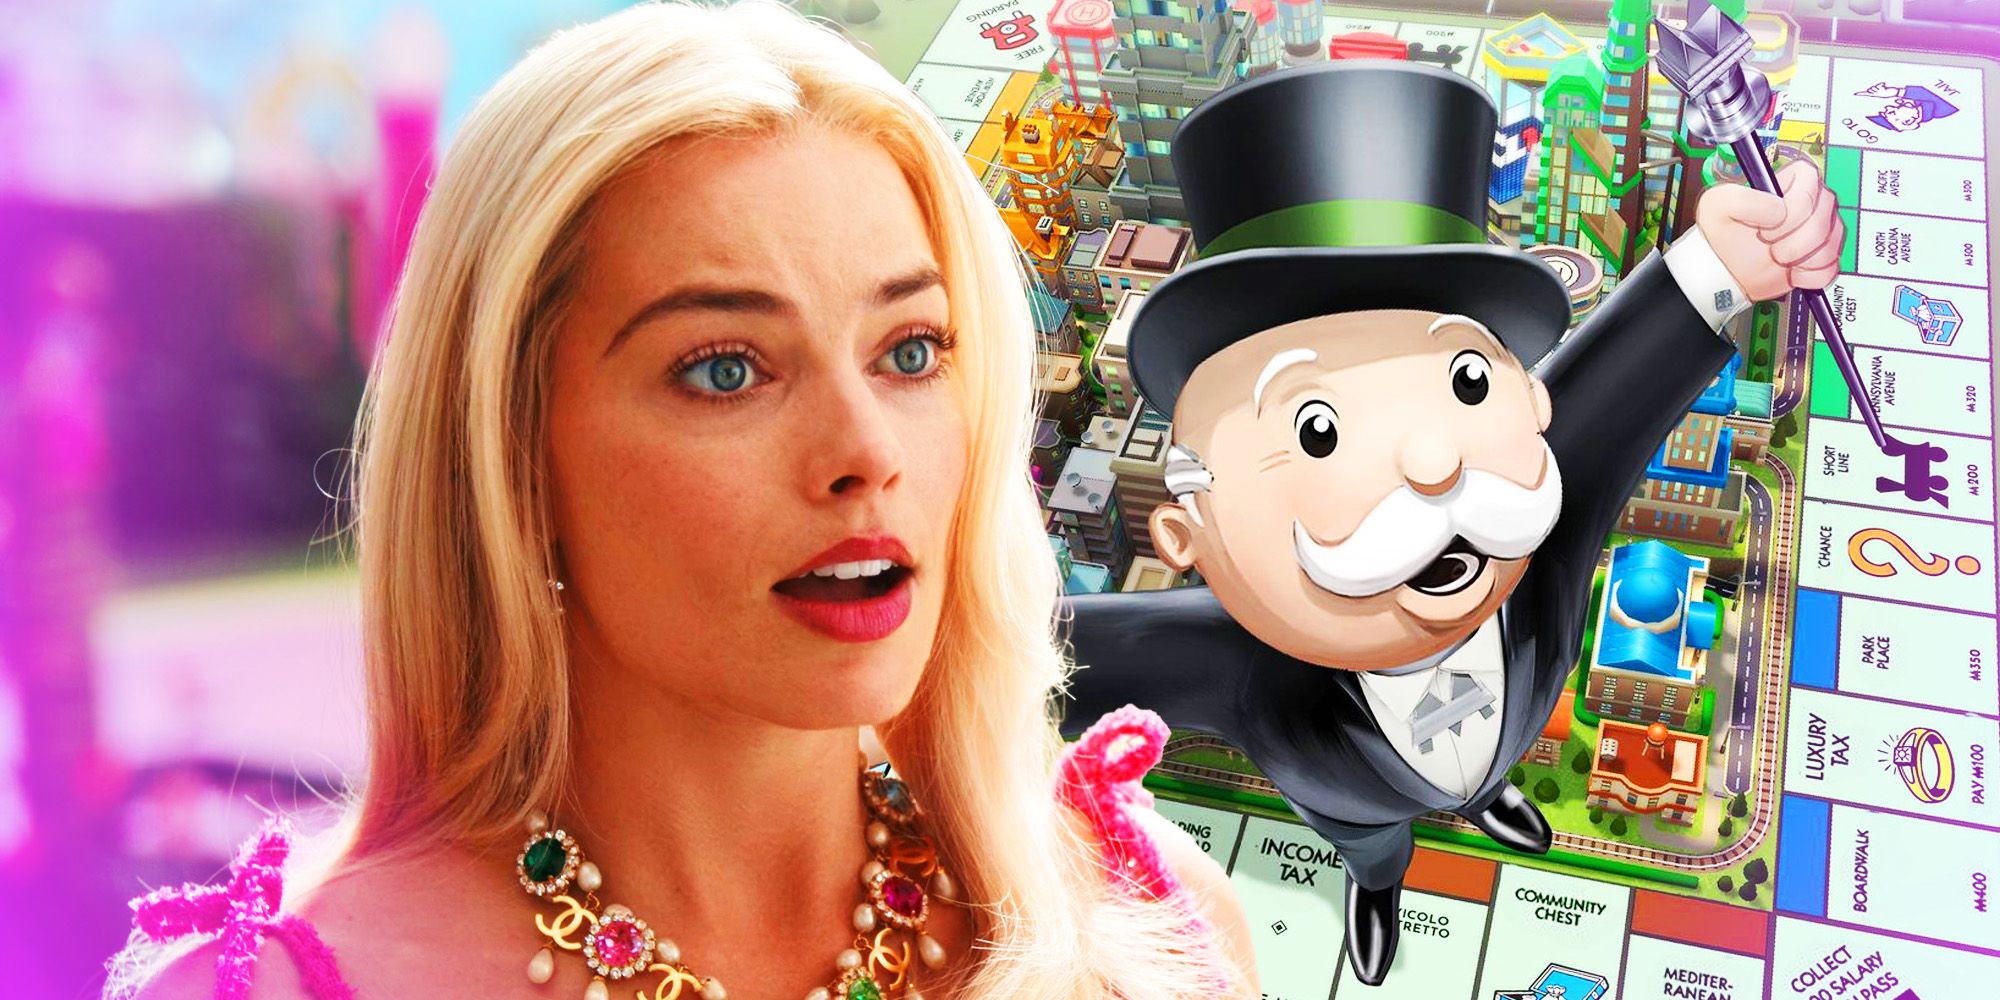 Margot Robbie in Barbie and the Monopoly man standing on the board game